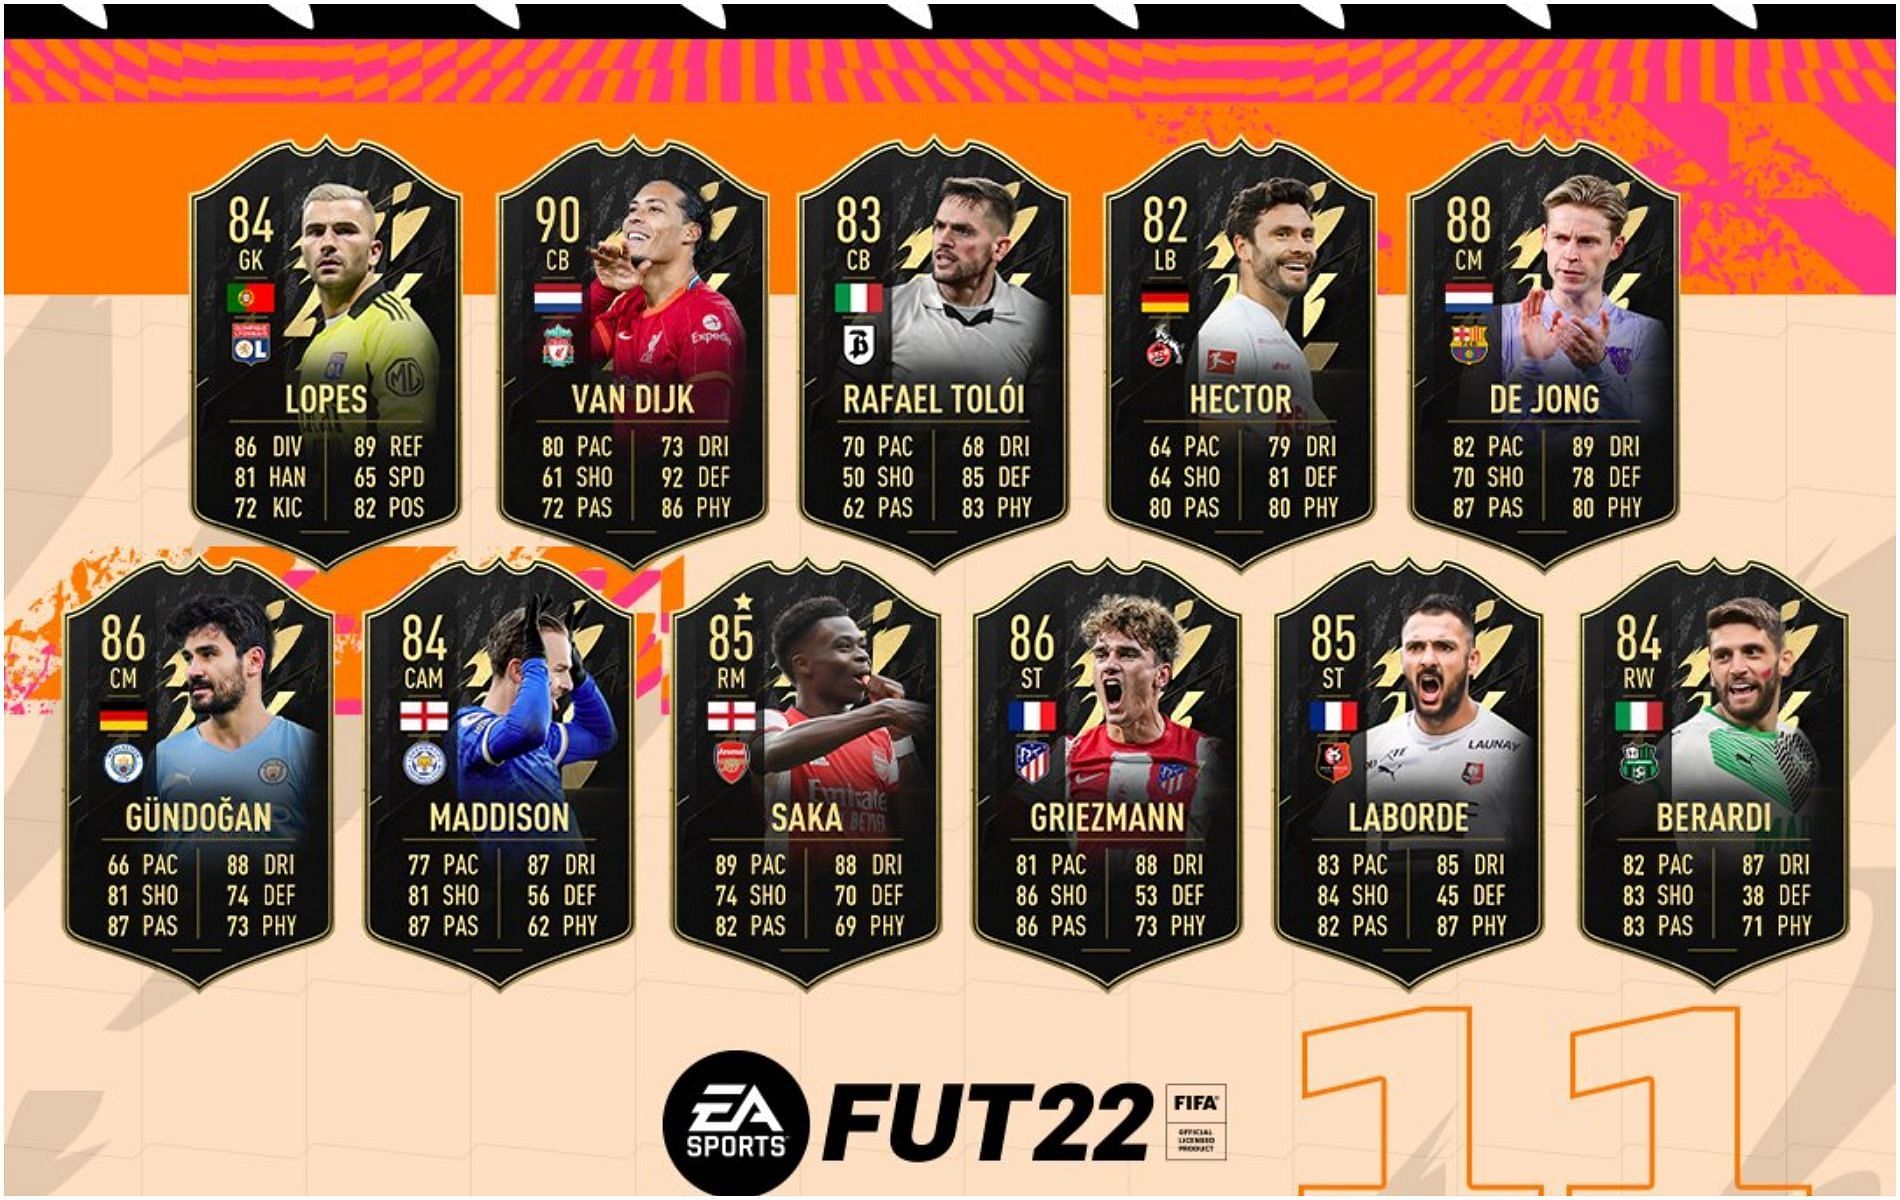 TOTW 11 is live in FIFA 22 (Image via EA Sports)